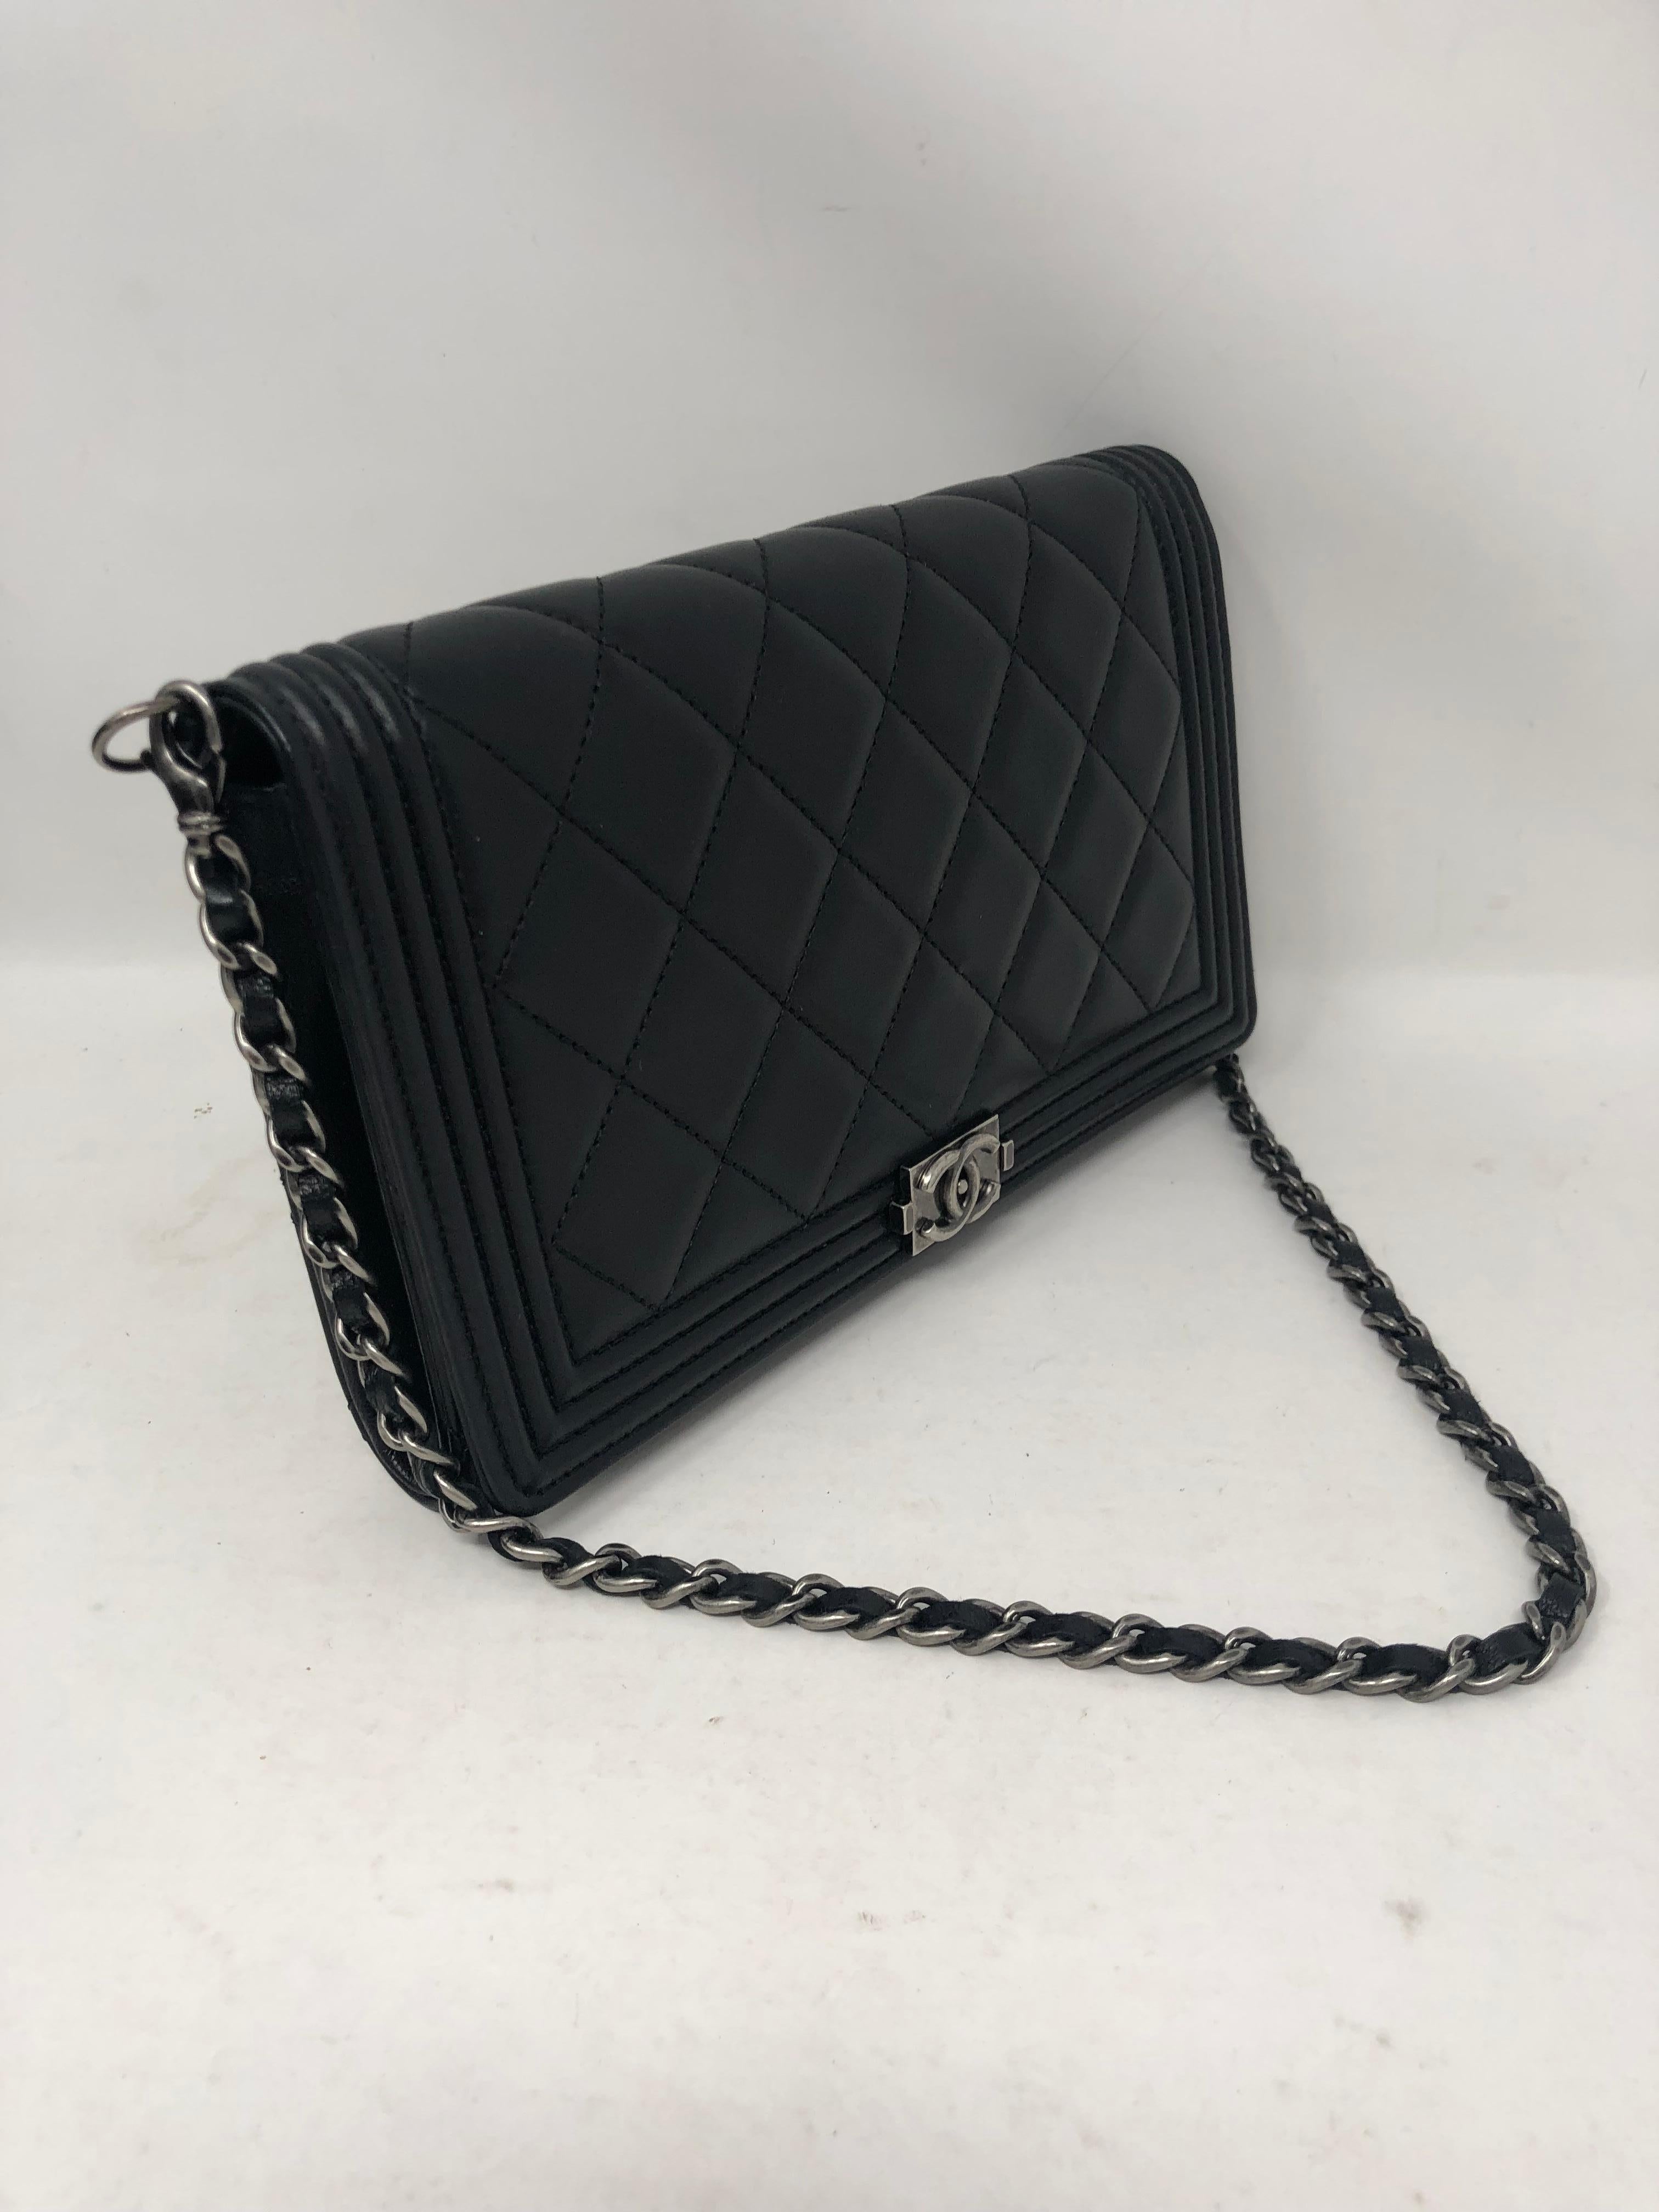 Chanel Black WOC on short chain. This is the rare and more limited WOC that was on a shorter chain not the longer chain. This bag can be worn as a clutch or a shoulder bag. Can also be worn as a wristlet. Hard to find style that also came with a